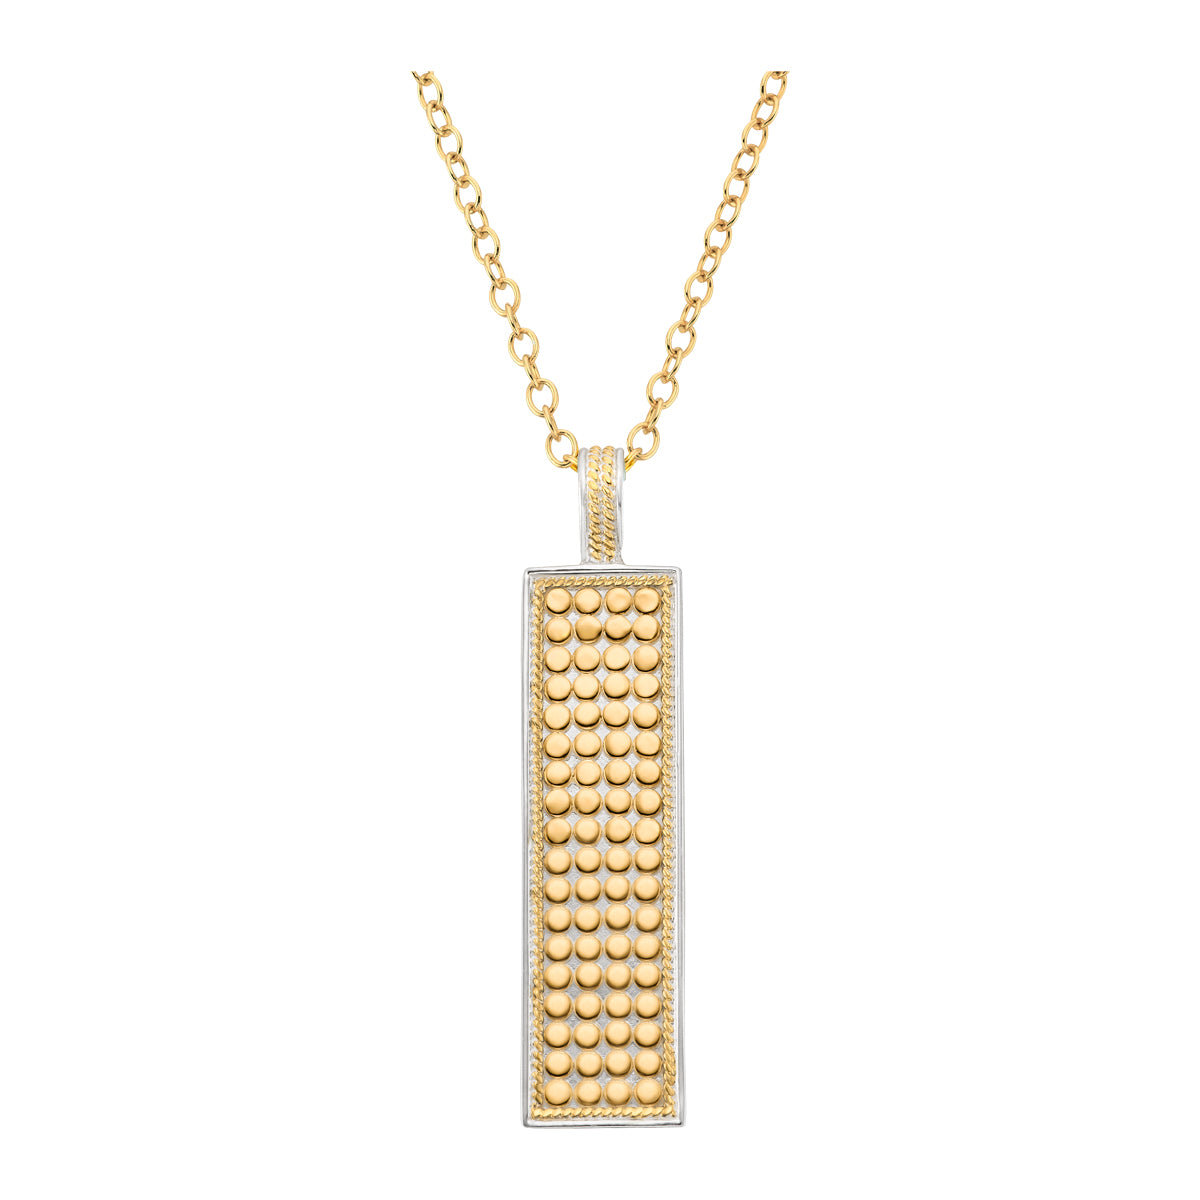 Ana Beck 18k gold plated and sterling silver Bar Pendant Necklace - Gold